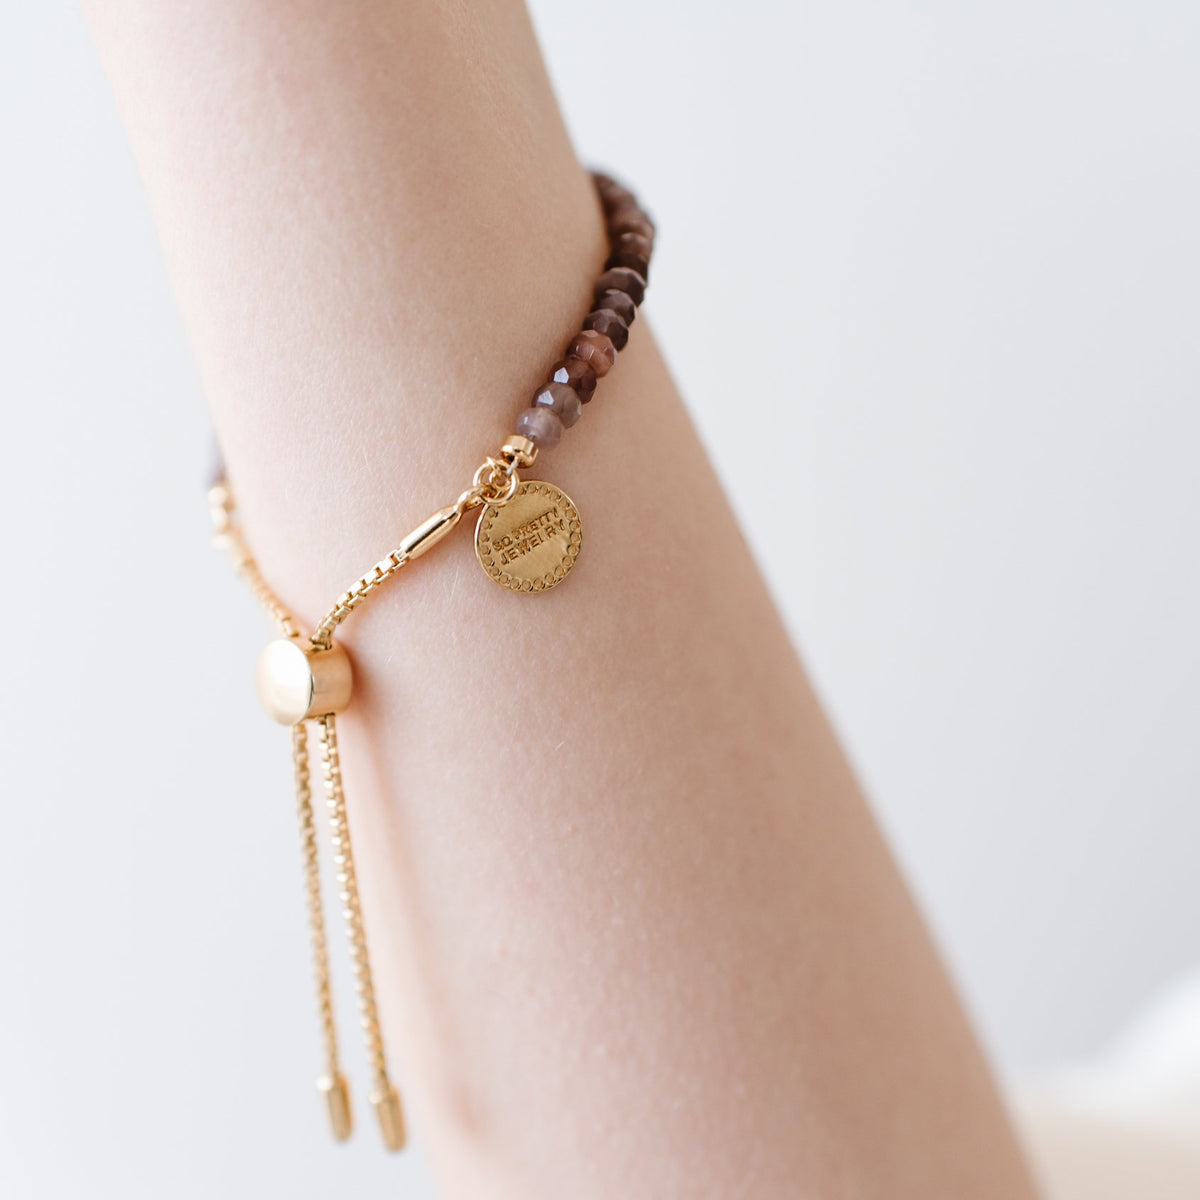 ICONIC ADJUSTABLE BRACELET - CHAI MOONSTONE &amp; GOLD- LIMITED EDITION - SO PRETTY CARA COTTER